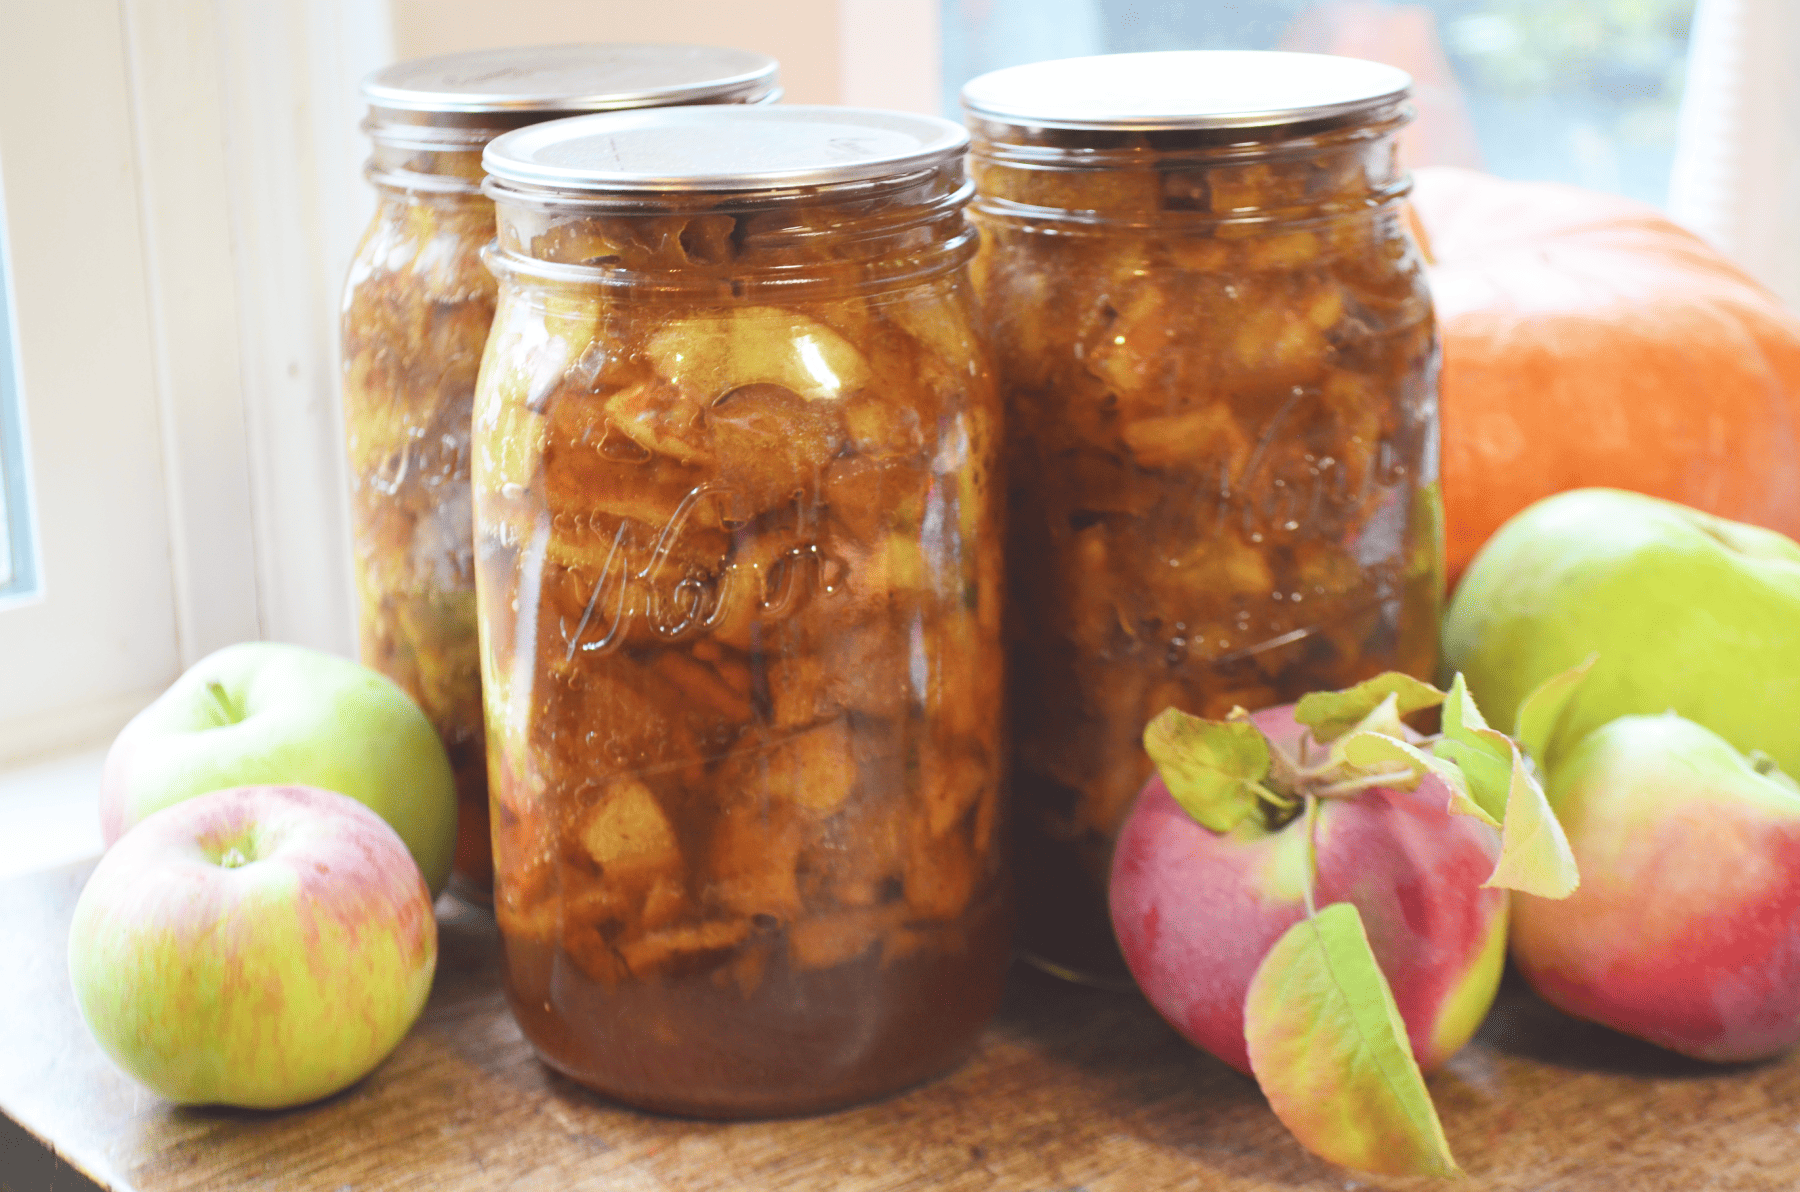 Sweet caramel colored apples fill jars for apple pies.